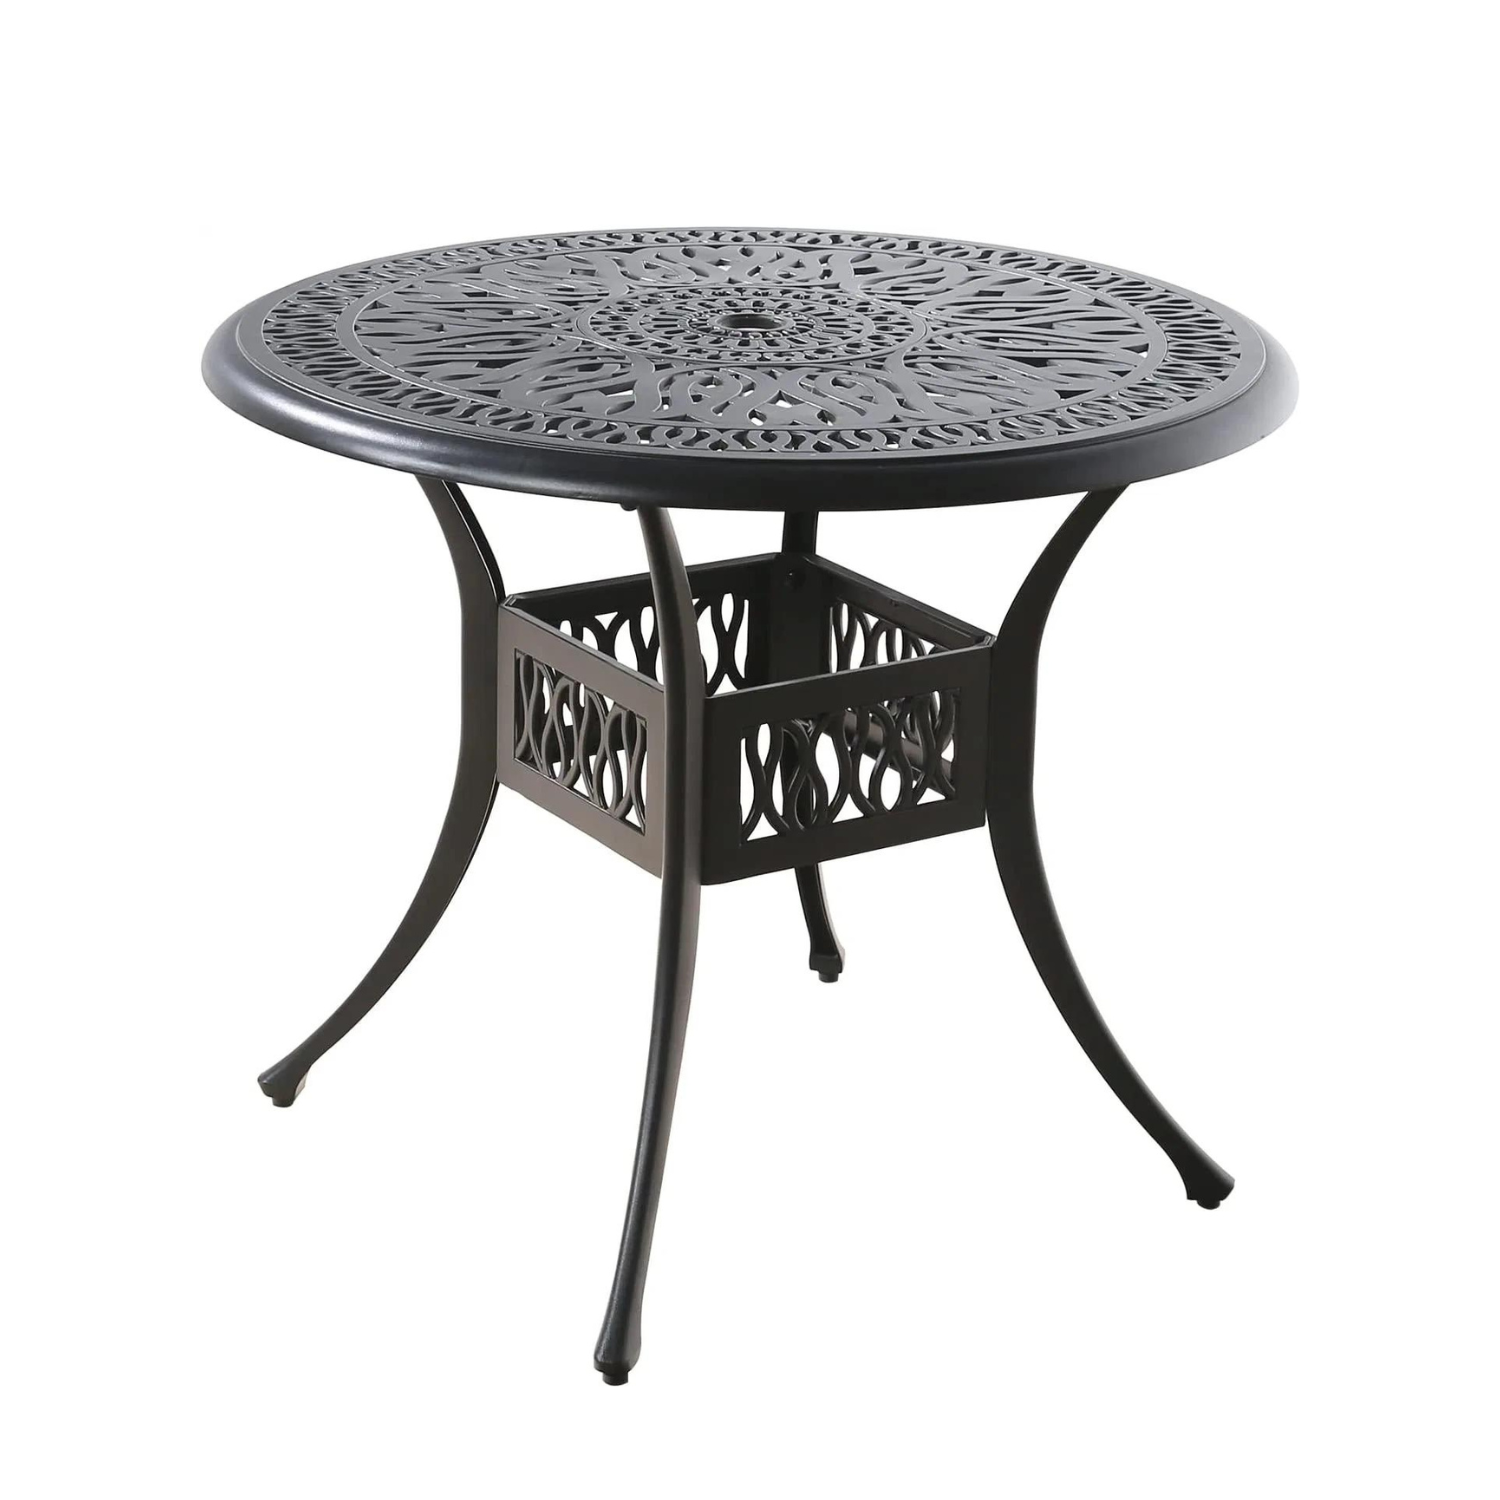 Patio Round Dining Table - Outdoor Cast Aluminum Bistro Table with 1.88' Umbrella Hole